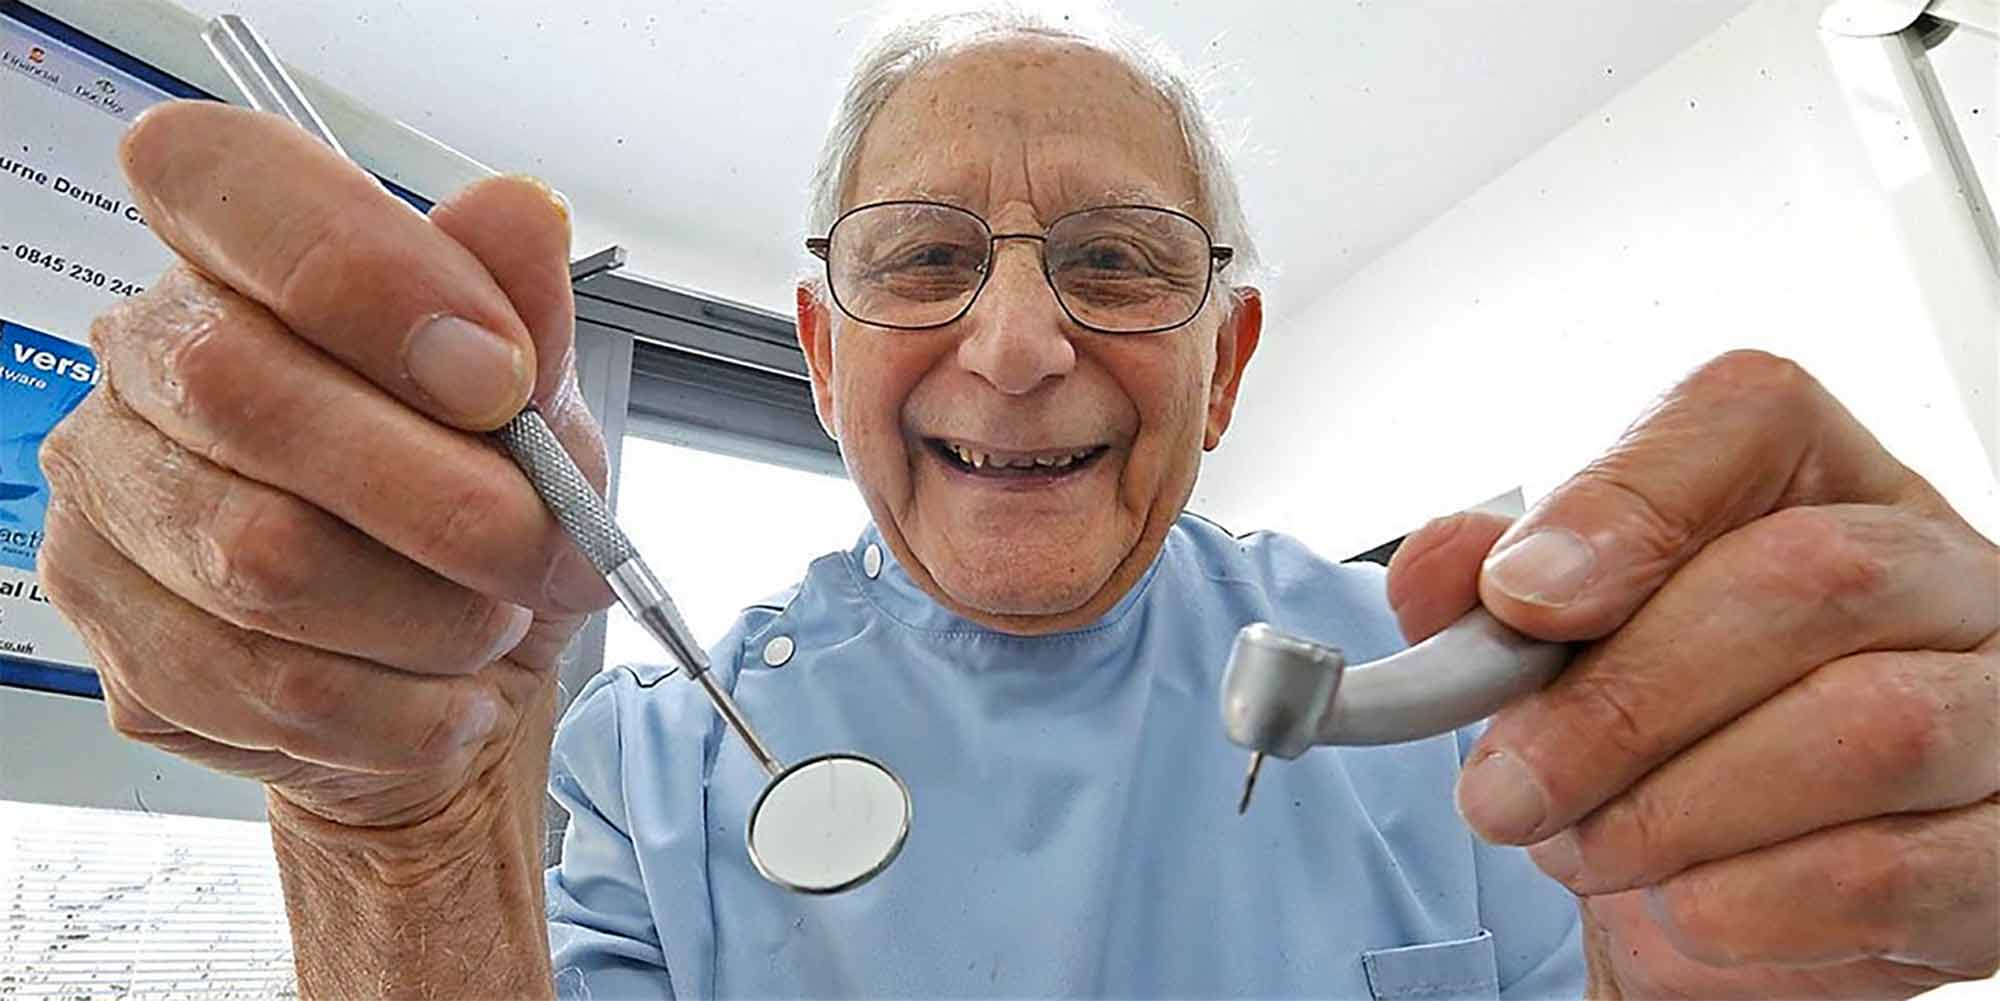 Dr Harry Olmer will talk about his experience as a holocaust survivor and dentist